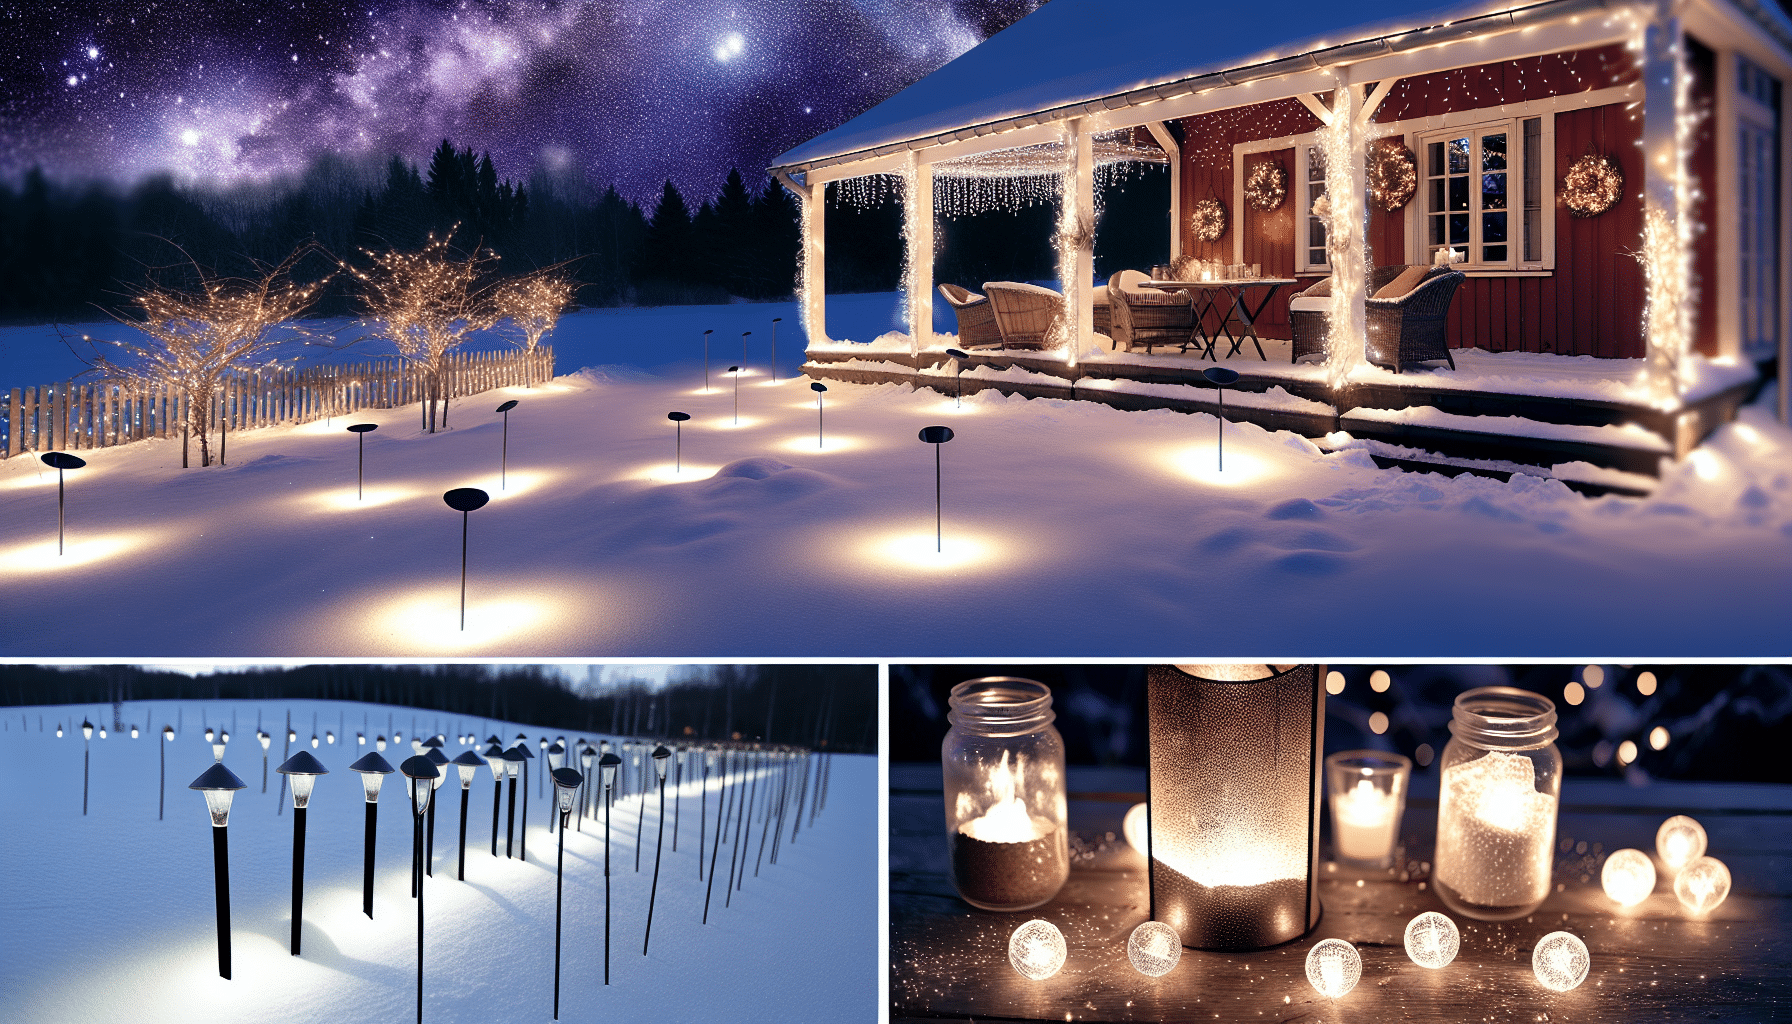 Light up your winter nights: outdoor lighting ideas to dazzle and inspire